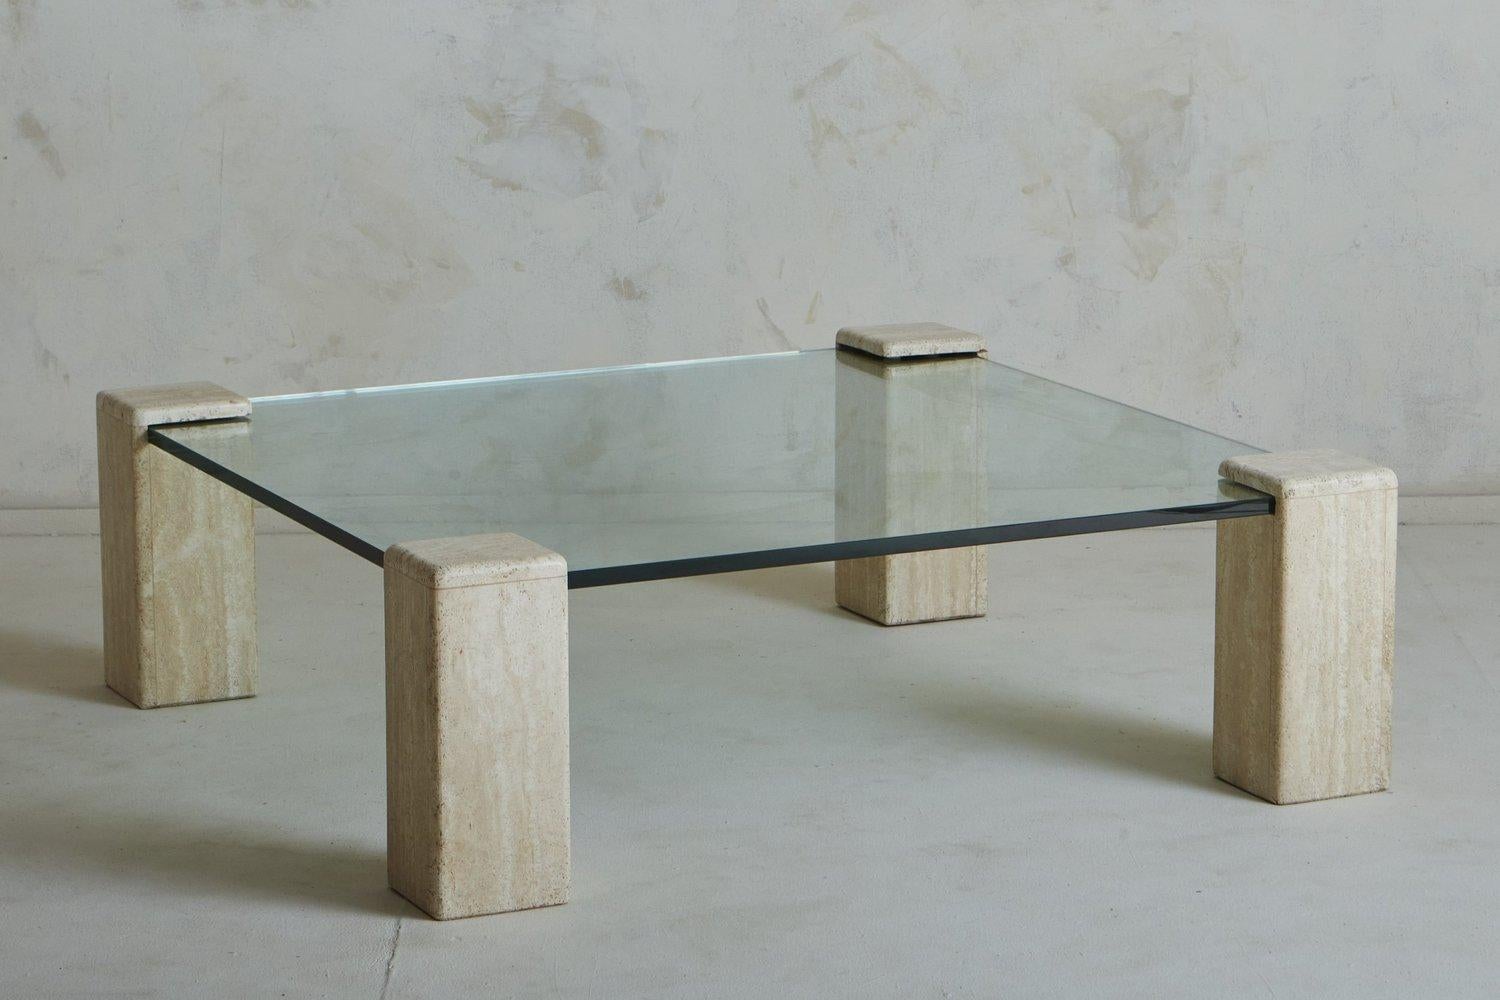 A 1970s German coffee table featuring four travertine block legs with beautiful taupe and cream veining. This stately table has a .75” thick glass top, whose corners insert within the block legs. Unmarked. Sourced in Belgium, 1970s.